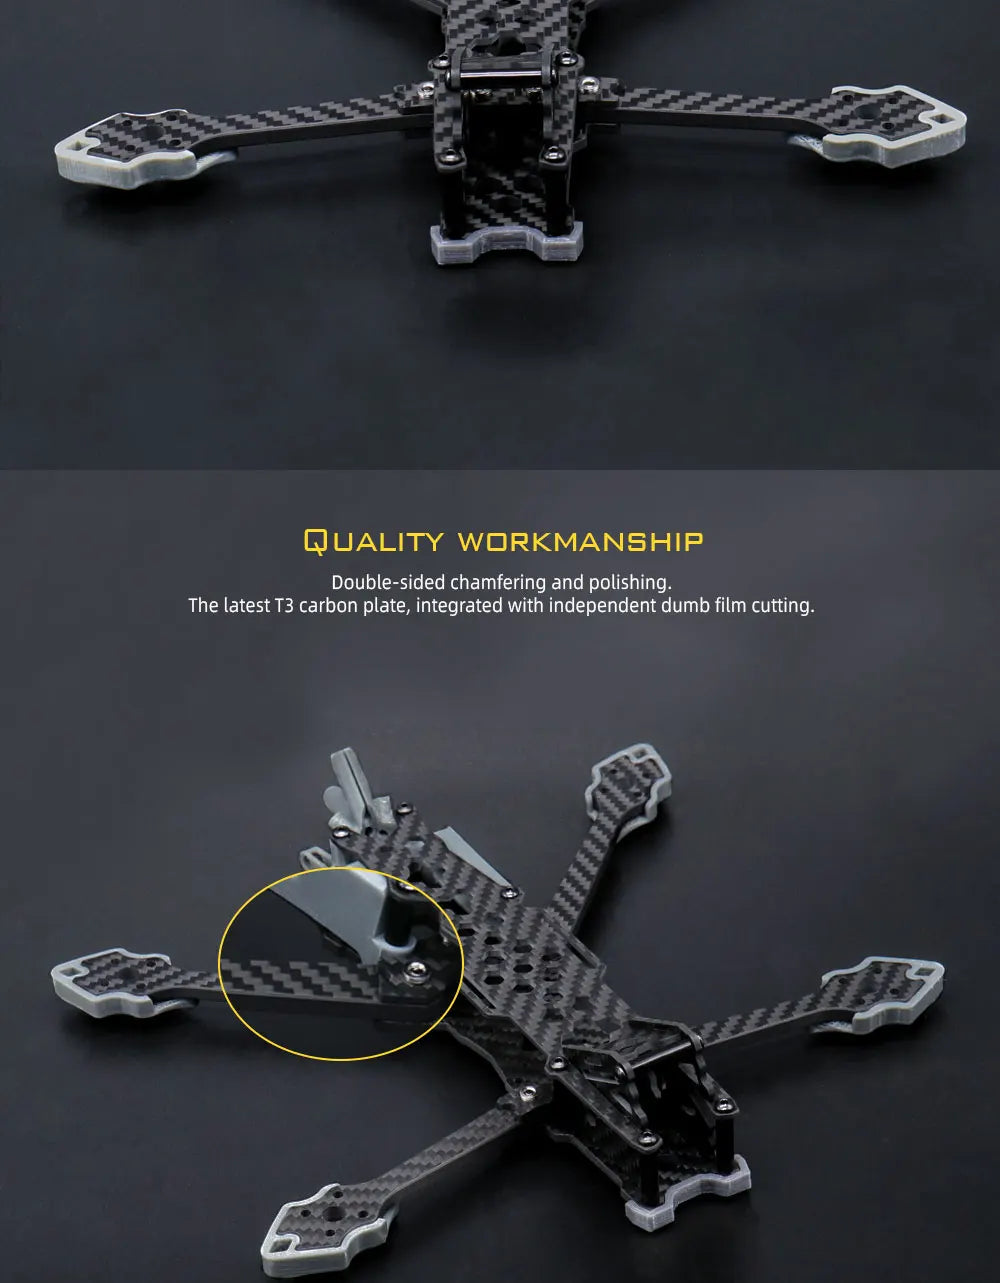 5-Inch FPV frame Kit, QUALITY WORKMANSHIP Double-sided chamfering and polishing: